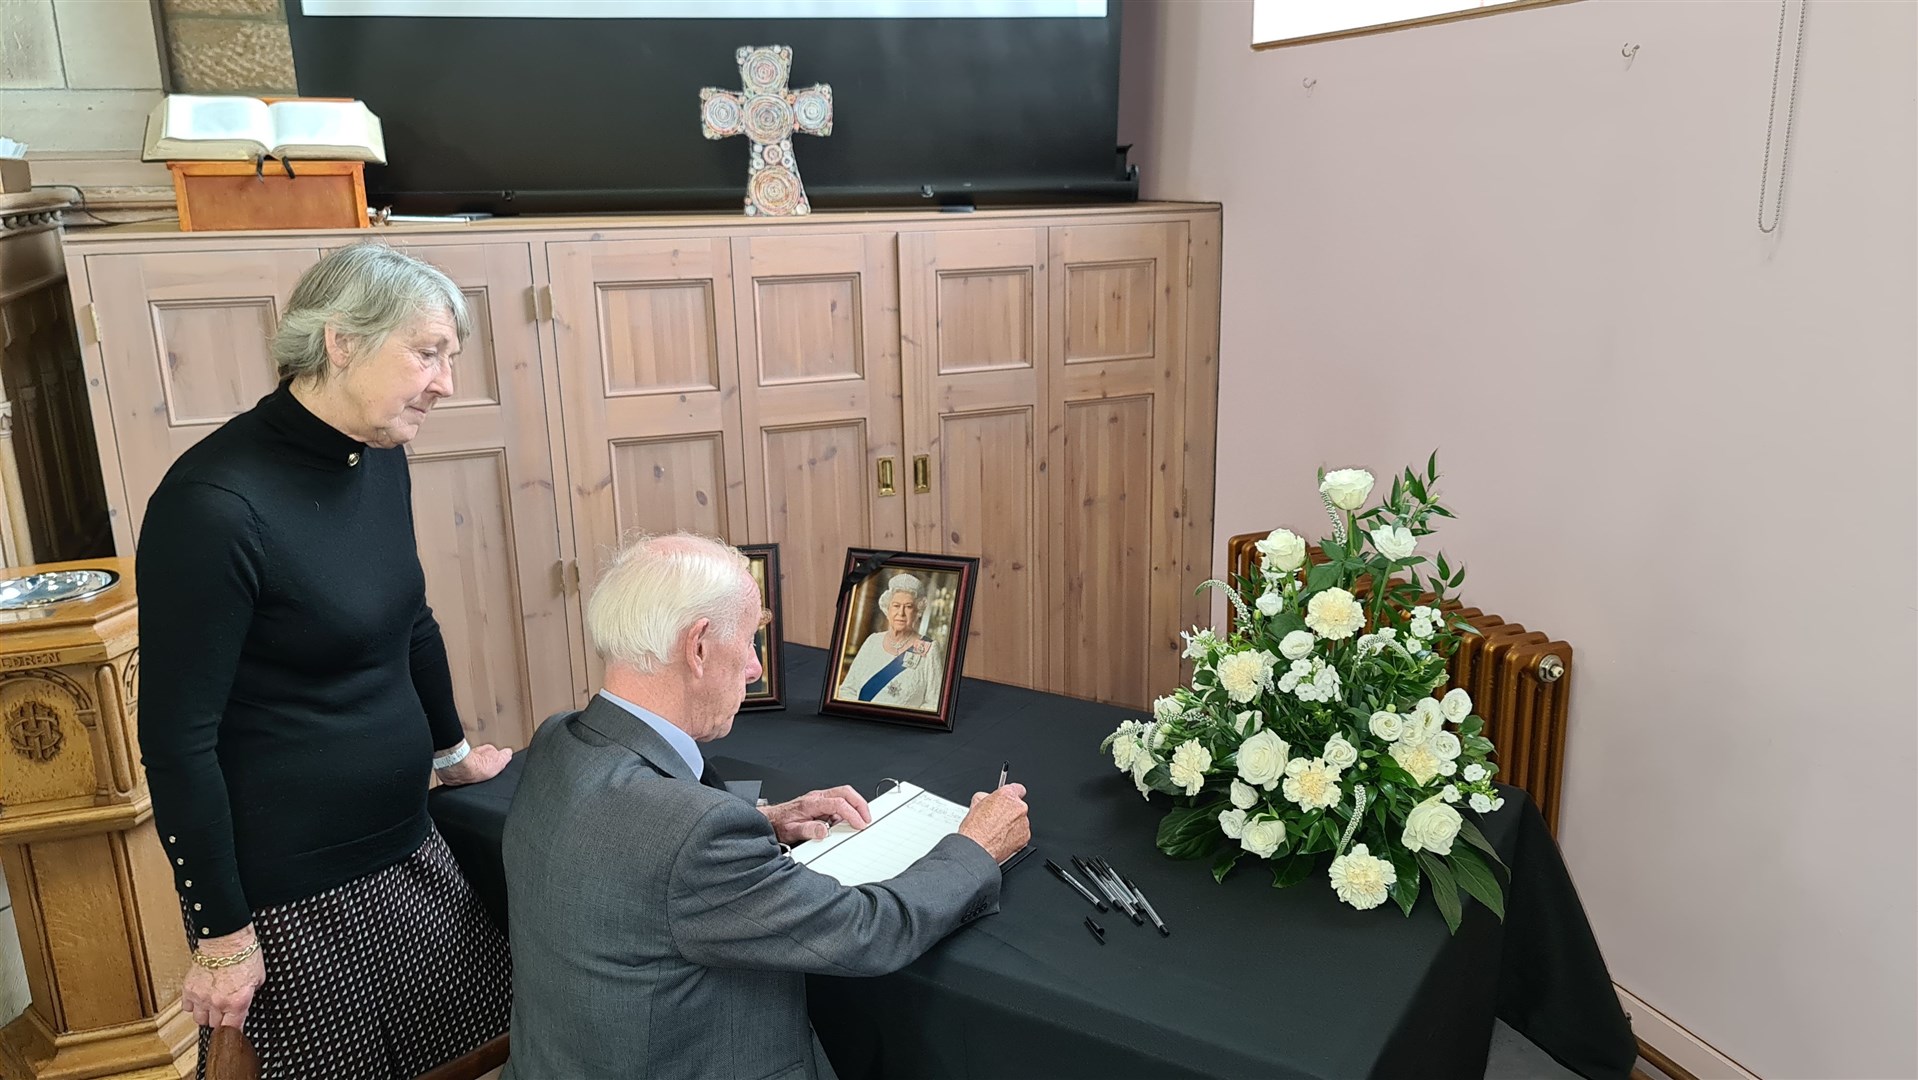 Deputy Lieutenants for Banffshire Hughie Monro and Patricia Lawson sign the book of condolence in Aberlour.